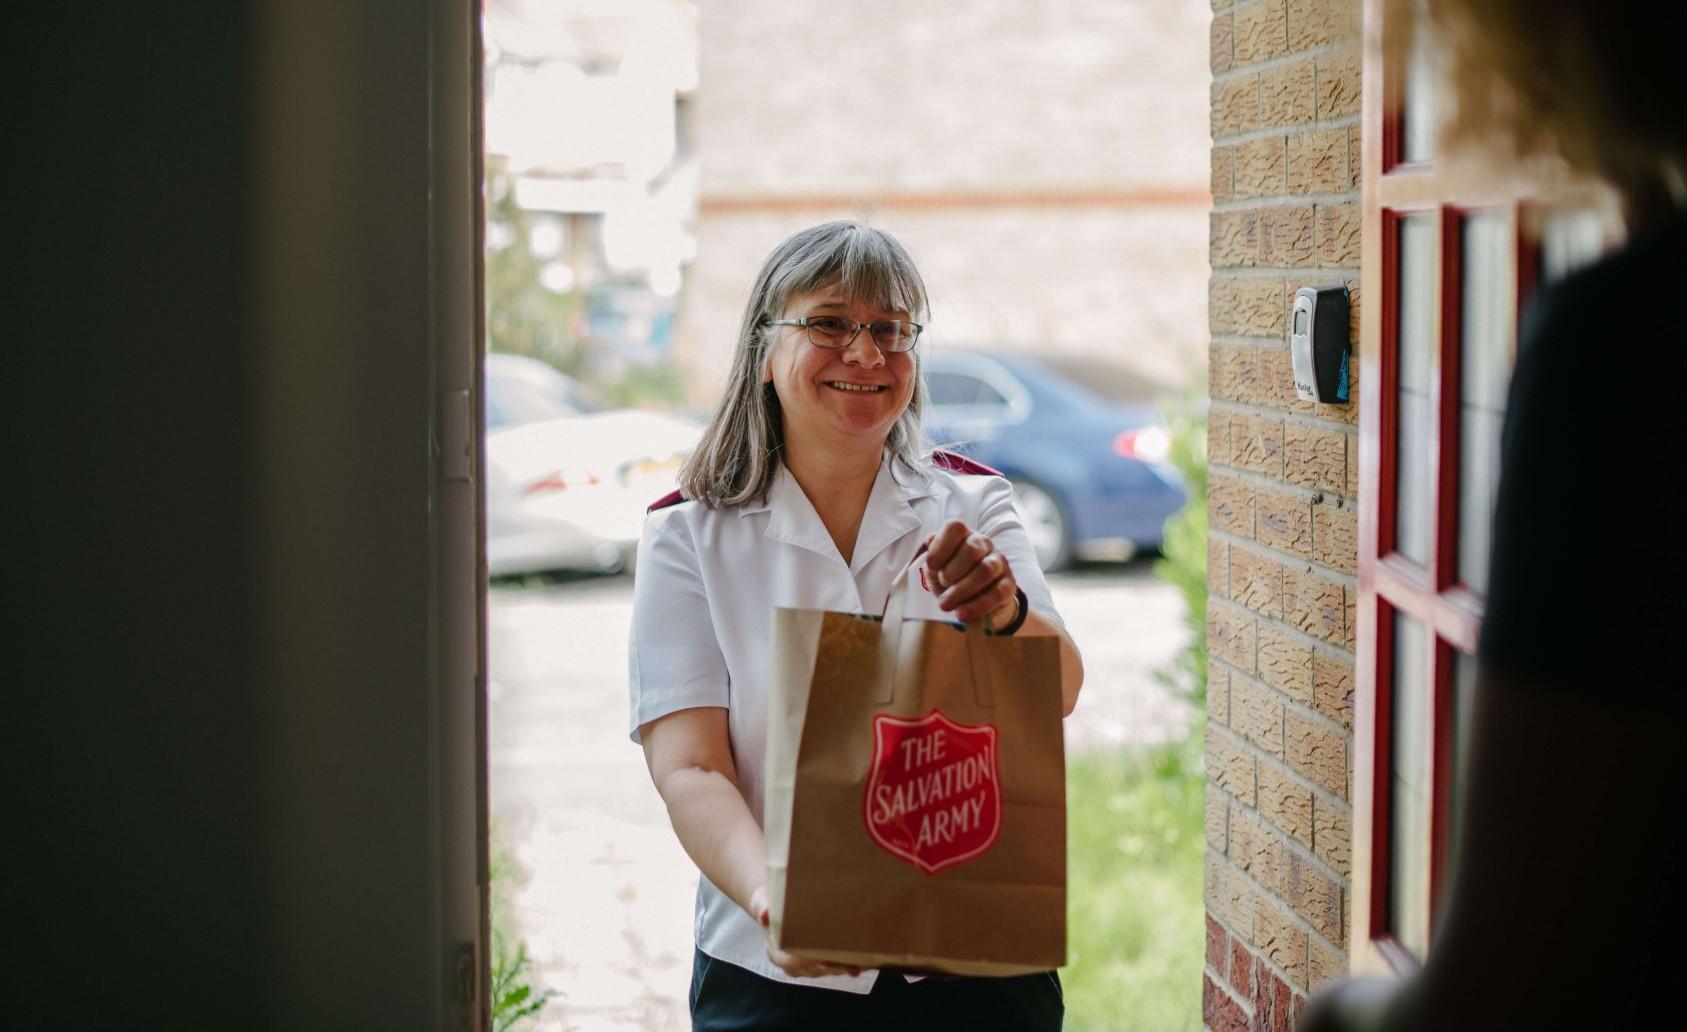 Salvation Army Officer delivering a parcel to a family's doorstep